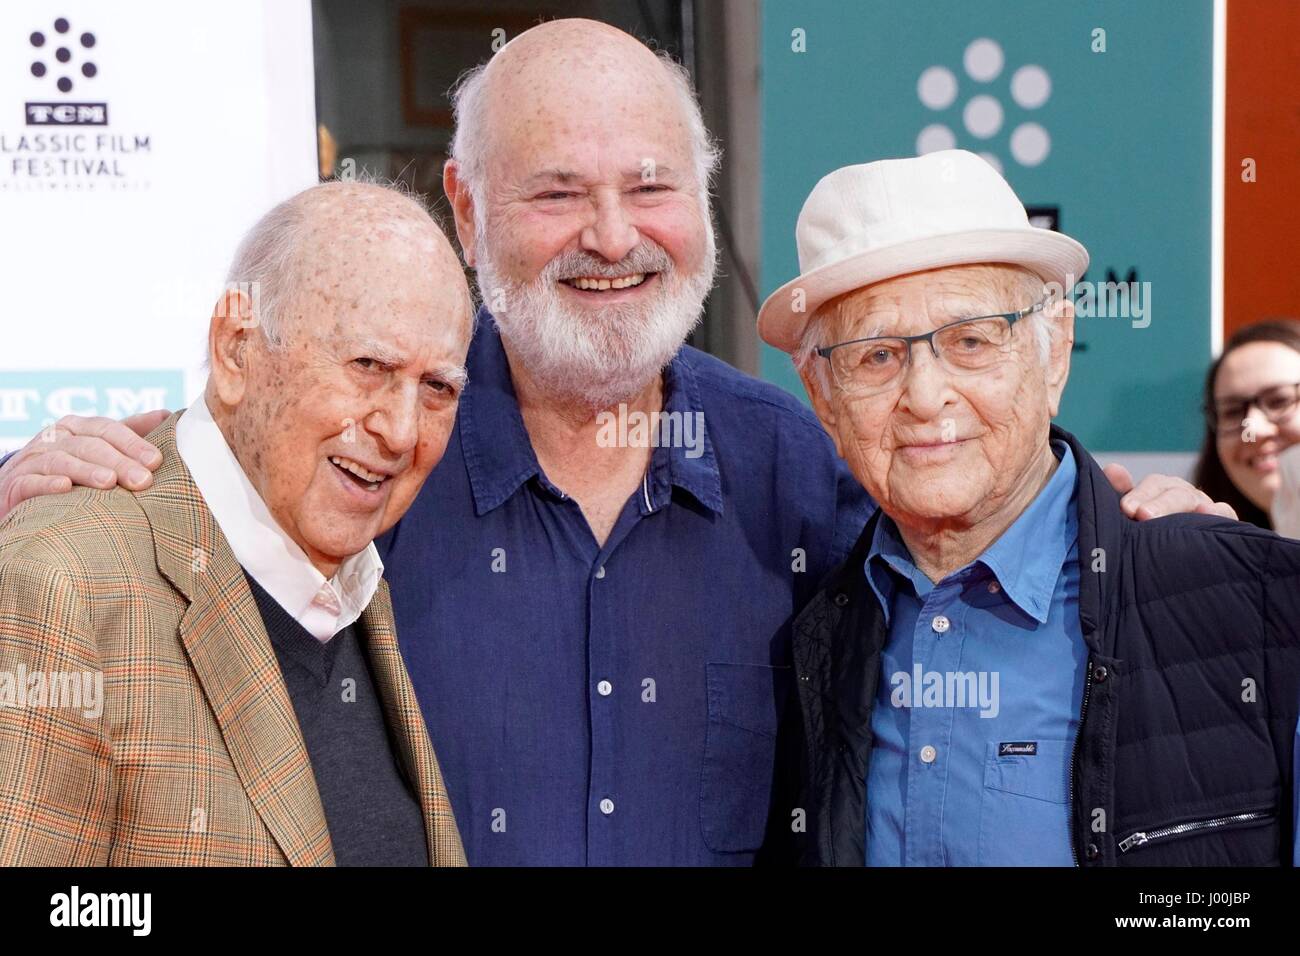 Los Angeles, CA, USA. 7th Apr, 2017. Carl Reiner, Rob Reiner, Norman Lear at a public appearance for Carl Reiner and Rob Reiner Hand- and Footprint Ceremony, TCL Chinese Theatre (formerly Grauman's), Los Angeles, CA April 7, 2017. Credit: Priscilla Grant/Everett Collection/Alamy Live News Stock Photo